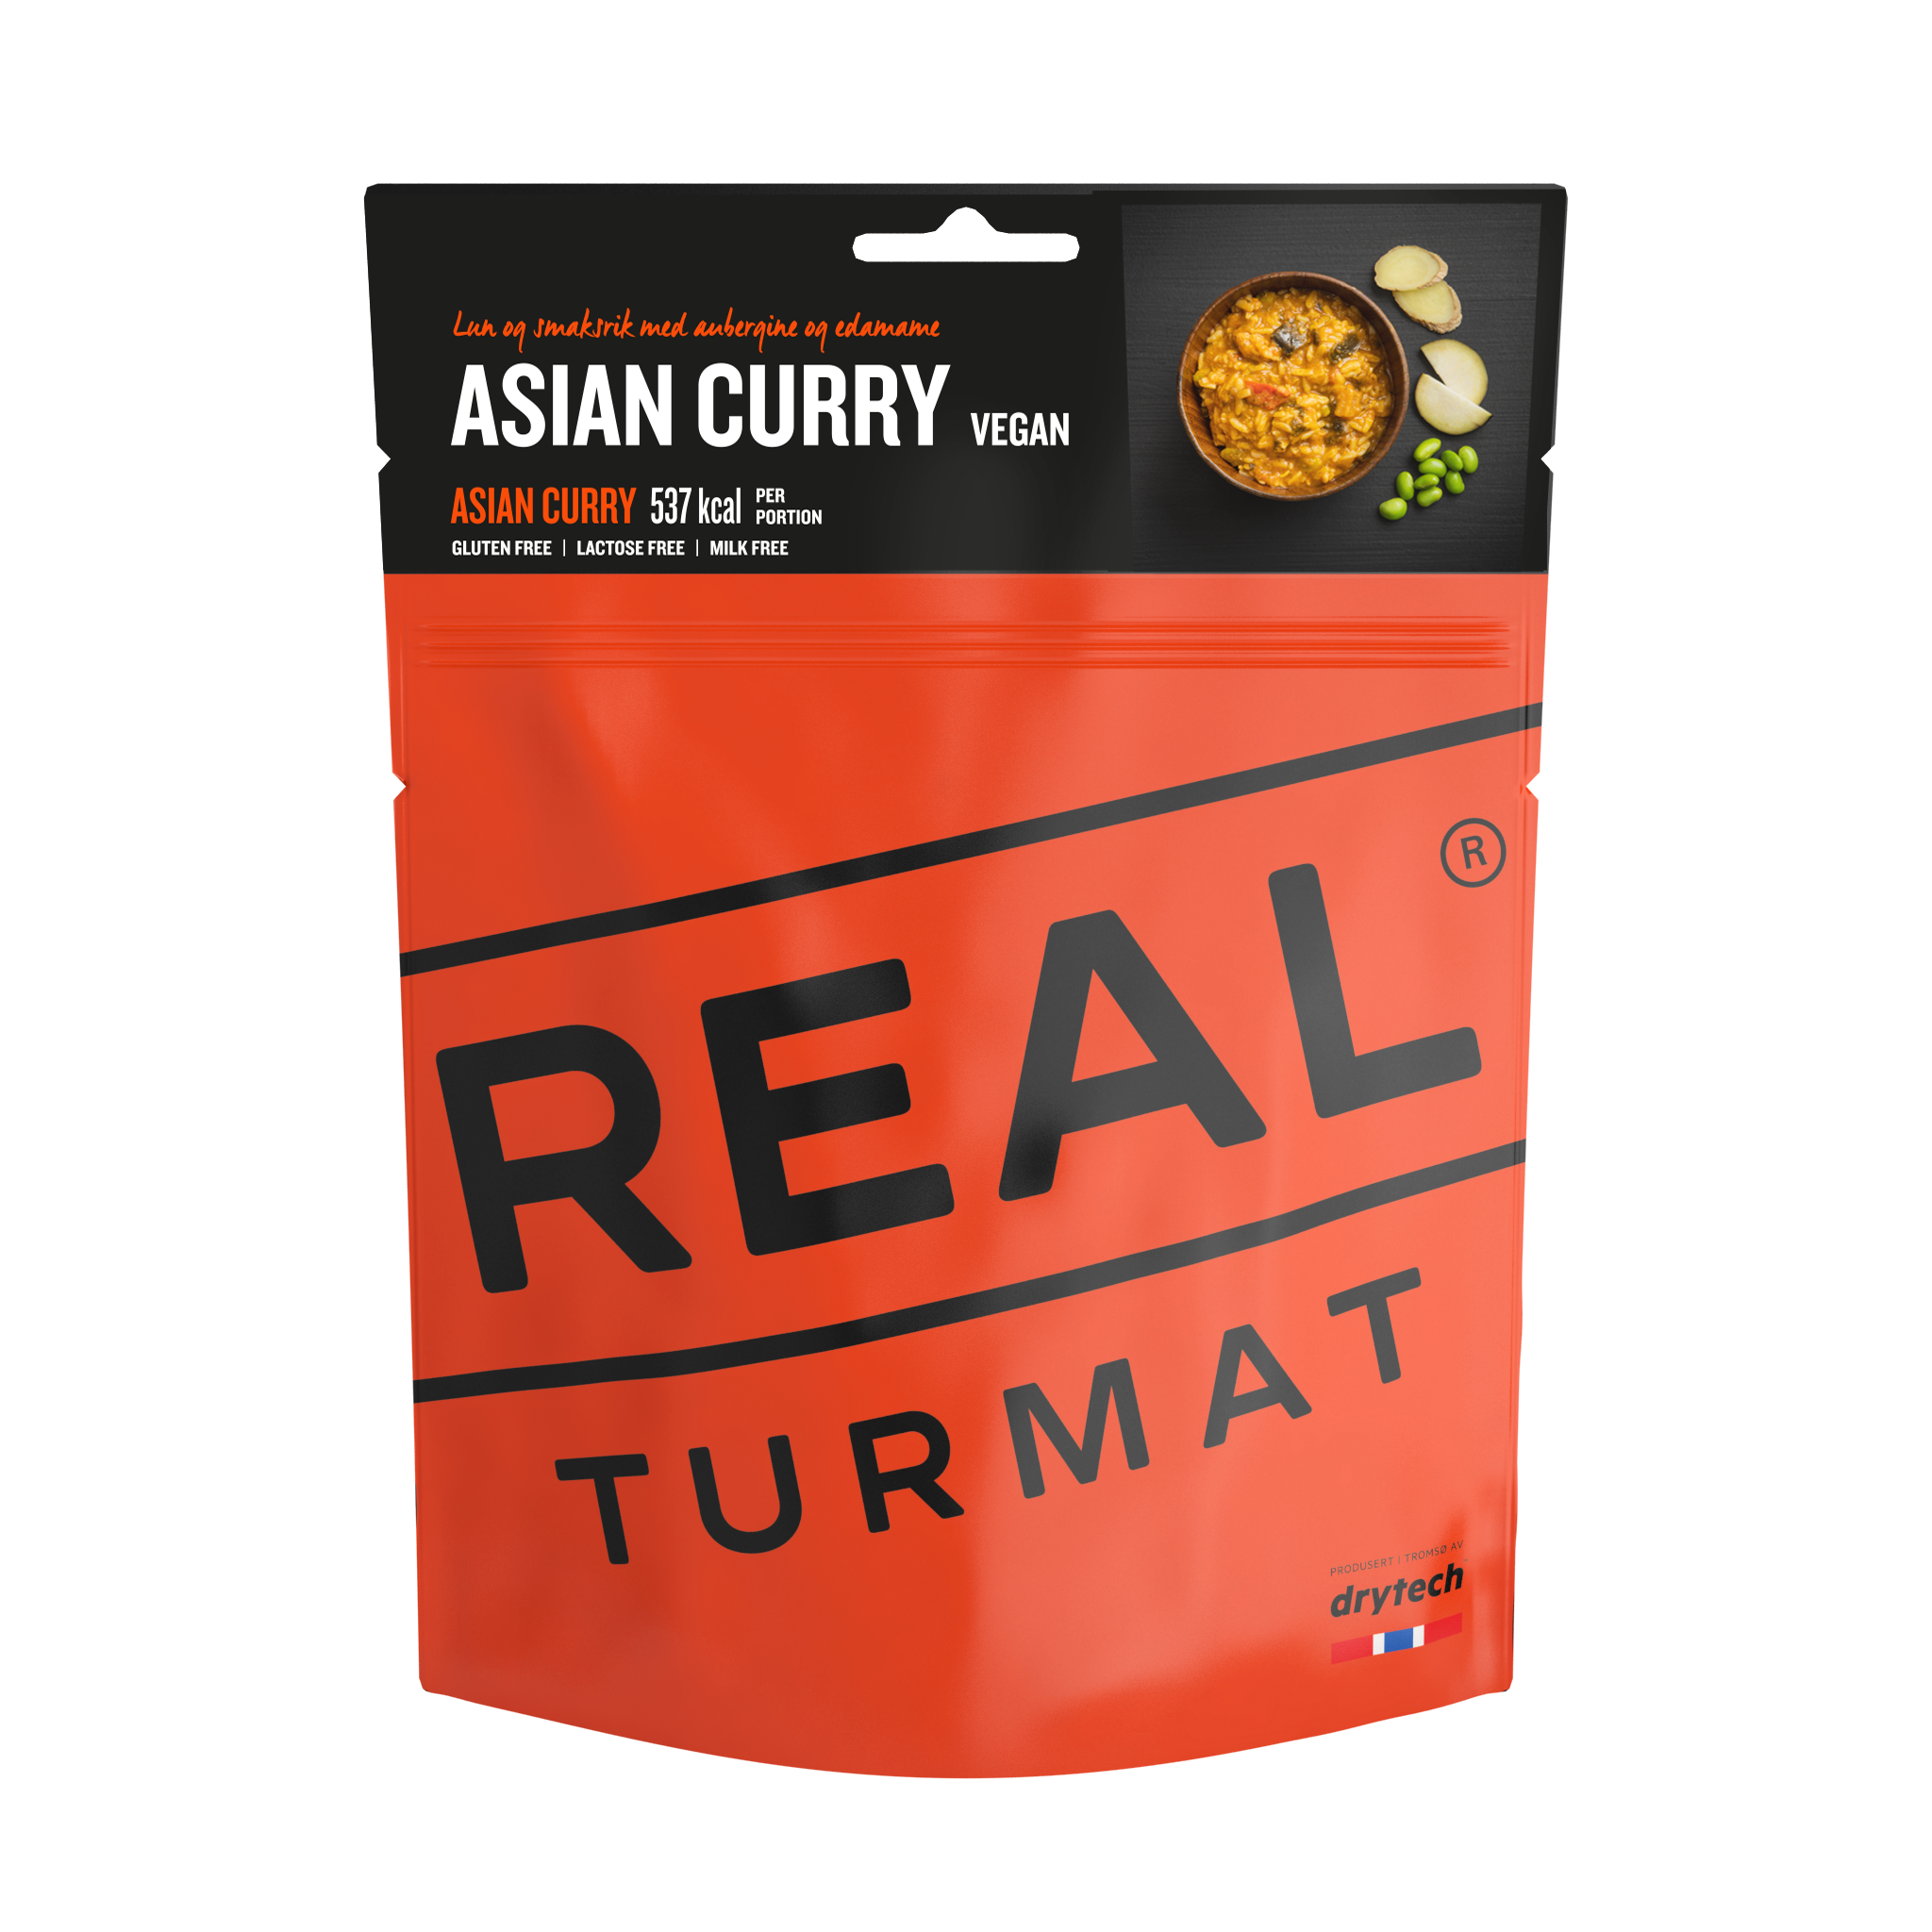 REAL TURMAT Asian Curry